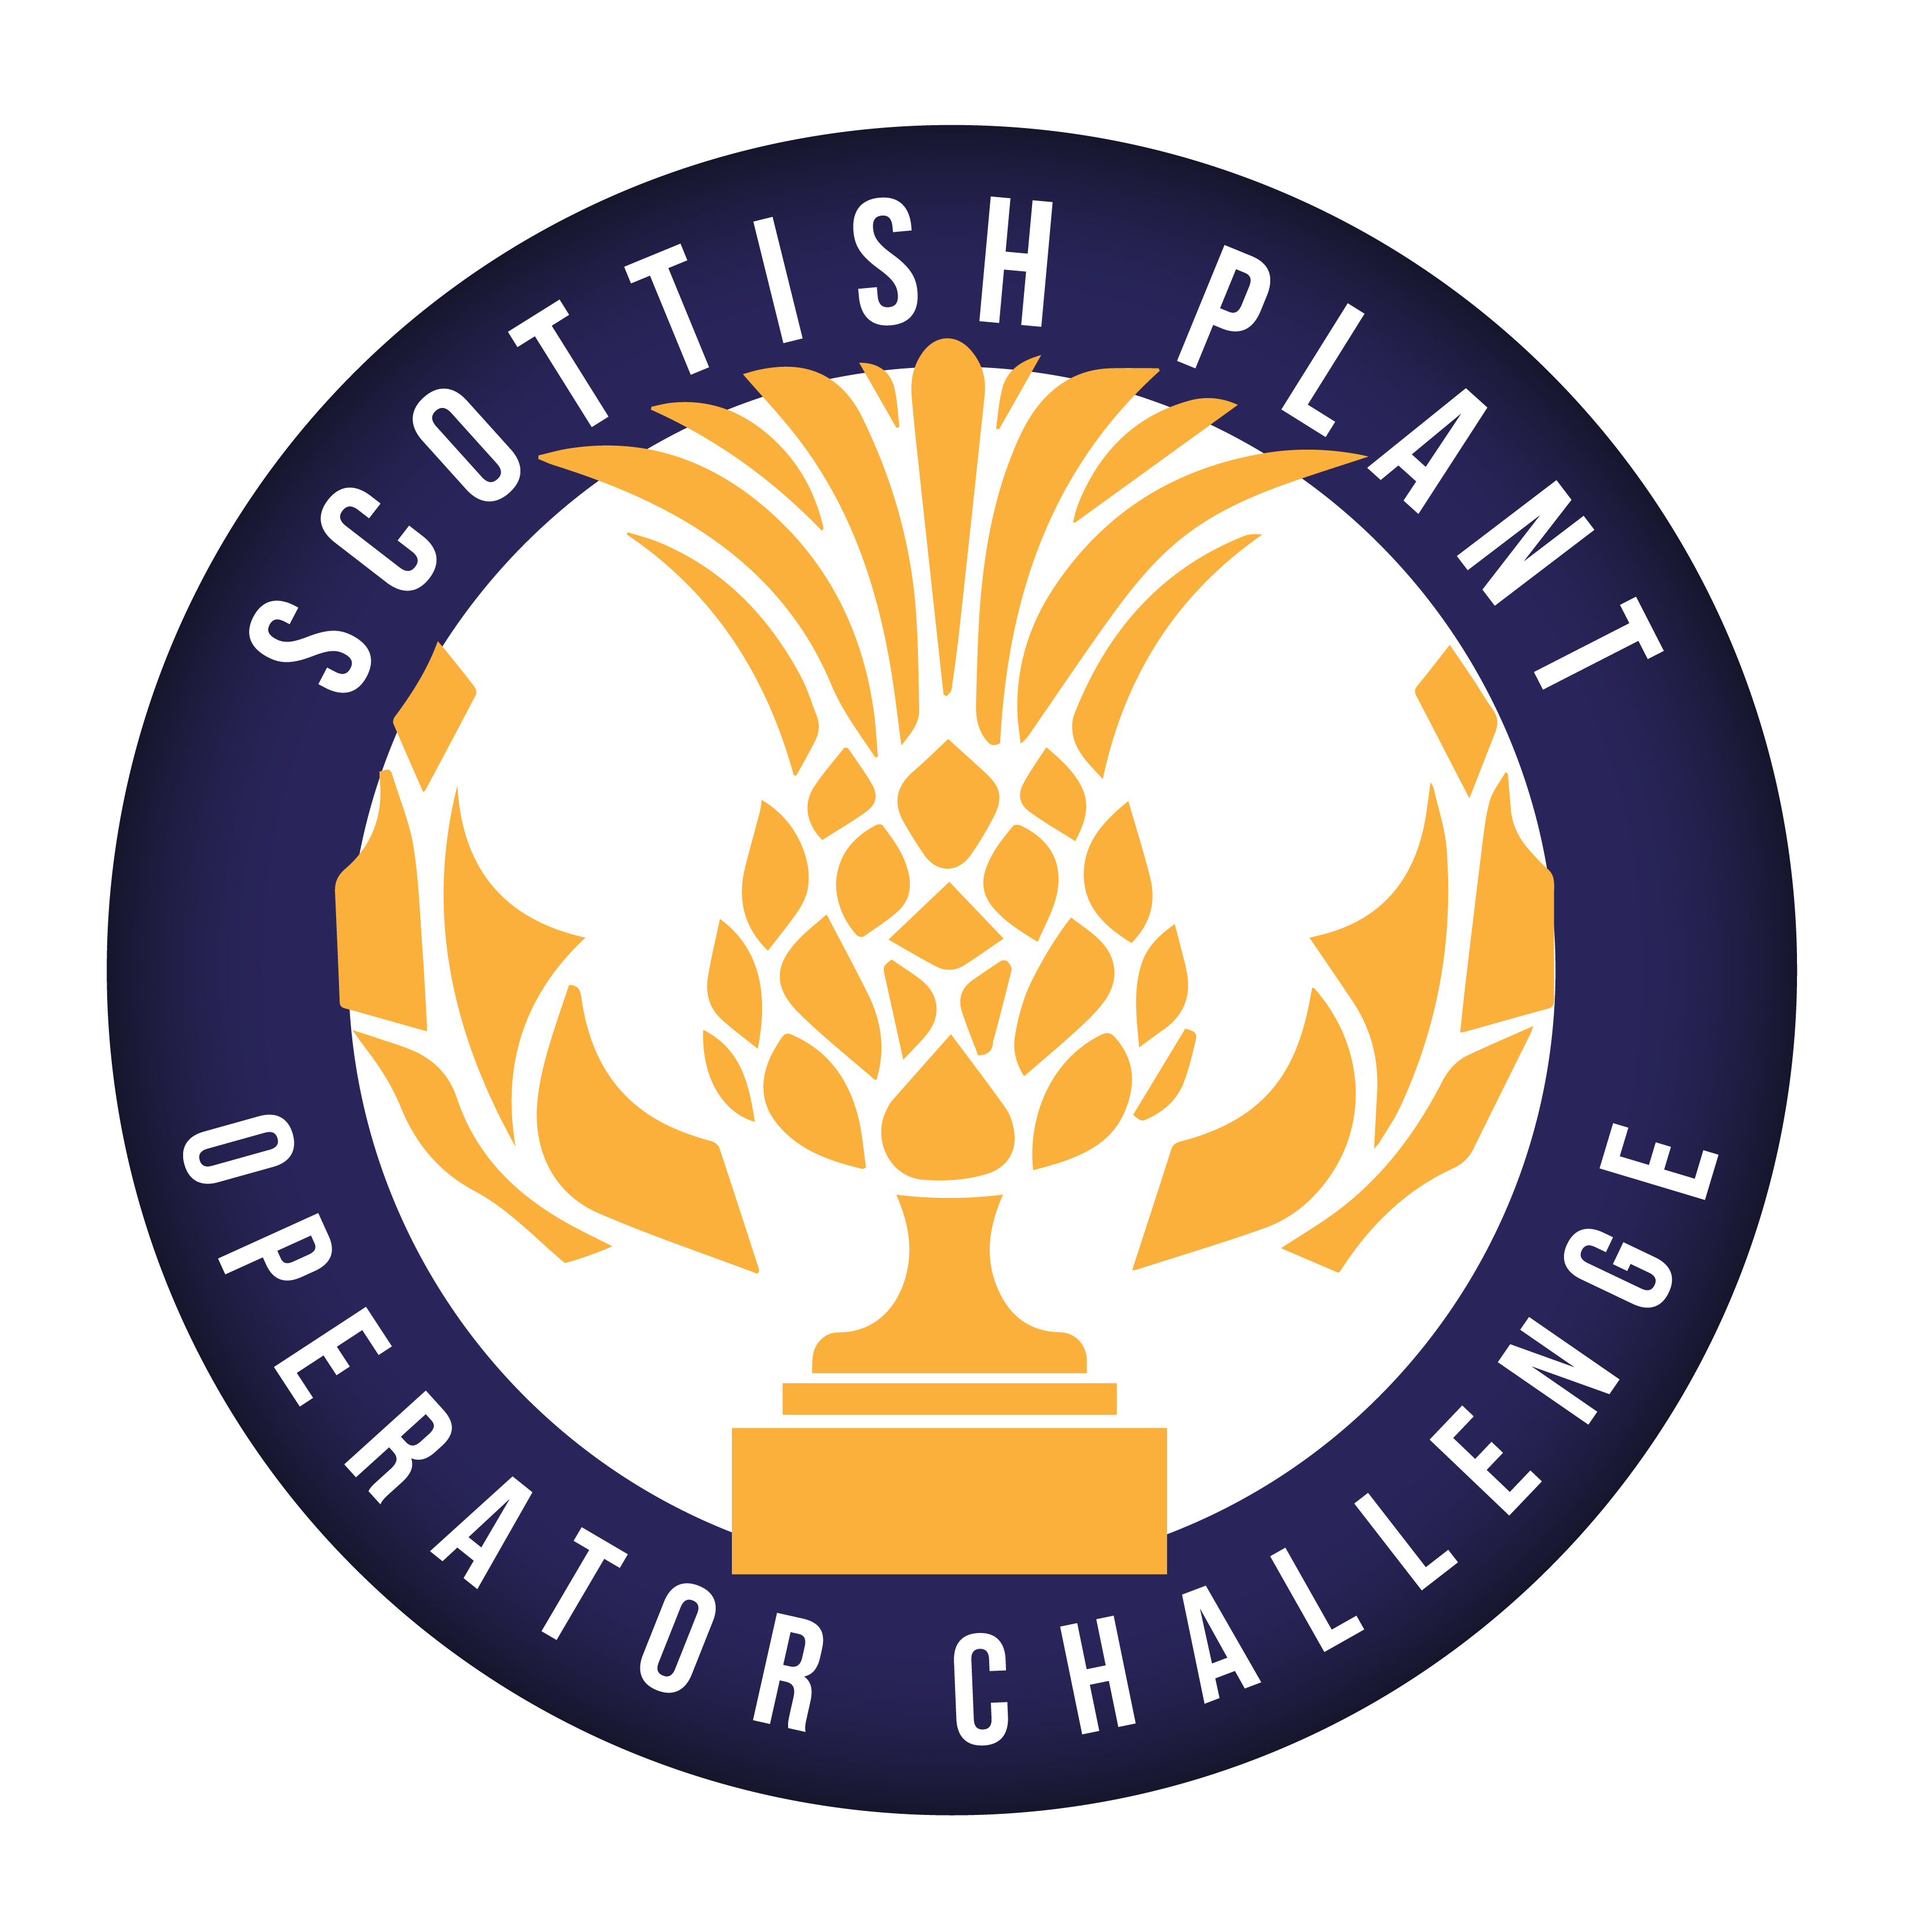 Scottish Plant Owners Association commits to plant competition